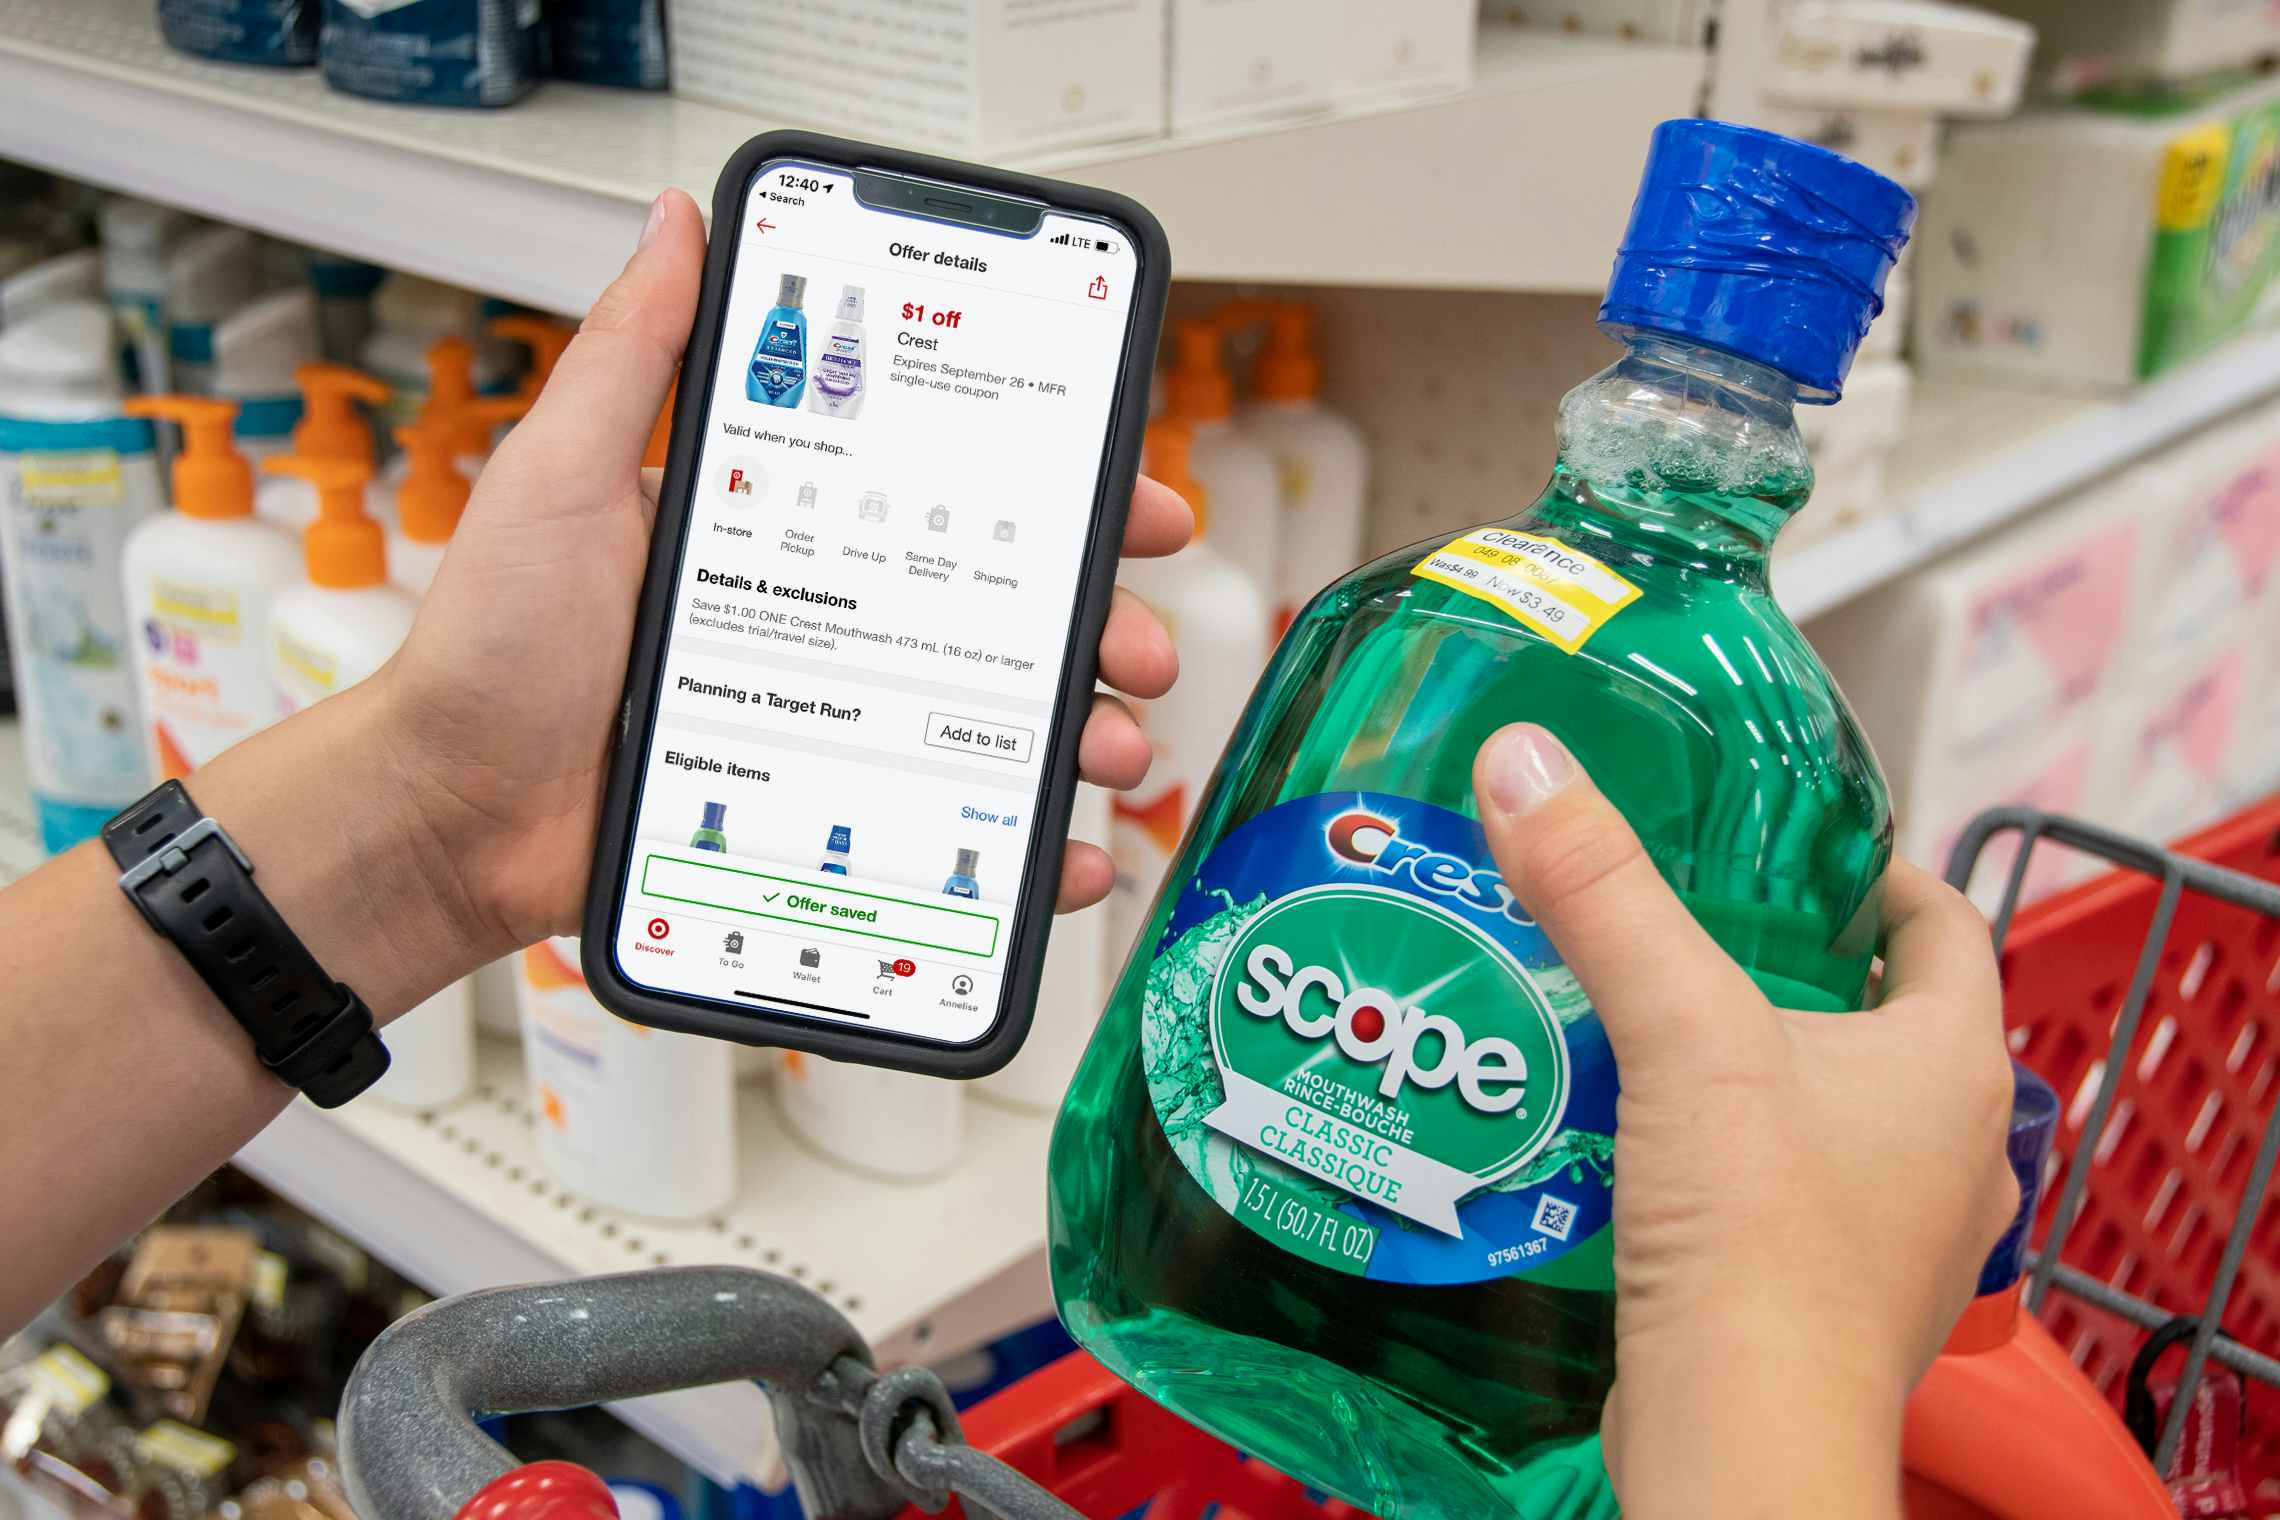 Target circle app with coupon next to Scope mouthwash with a clearance sticker.